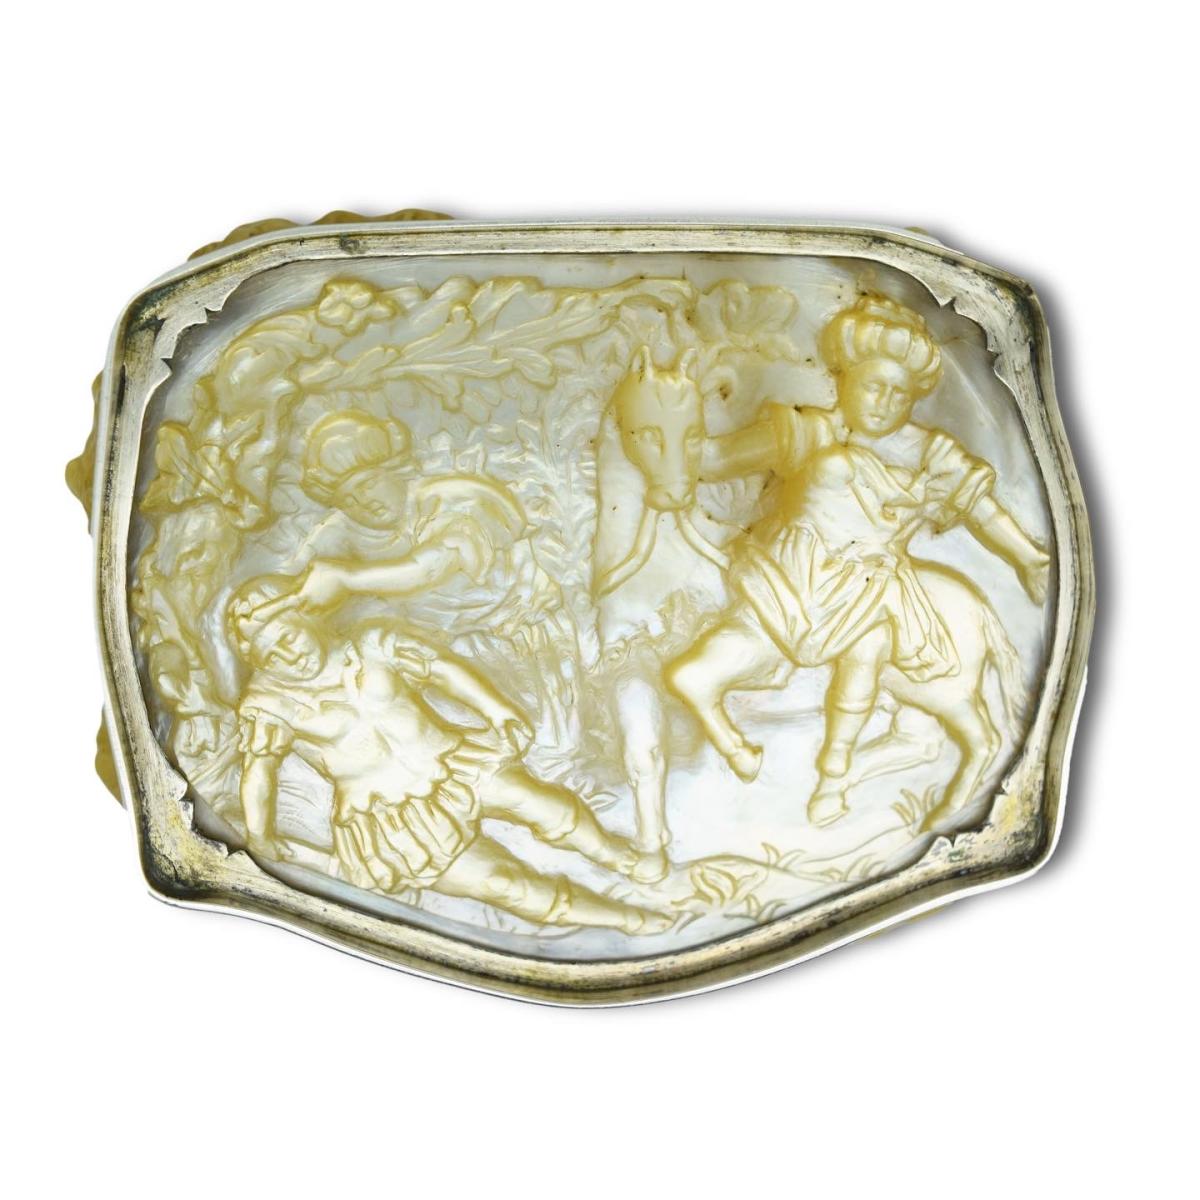 Silver mounted mother of pearl snuff box. Possibly English, 18th century